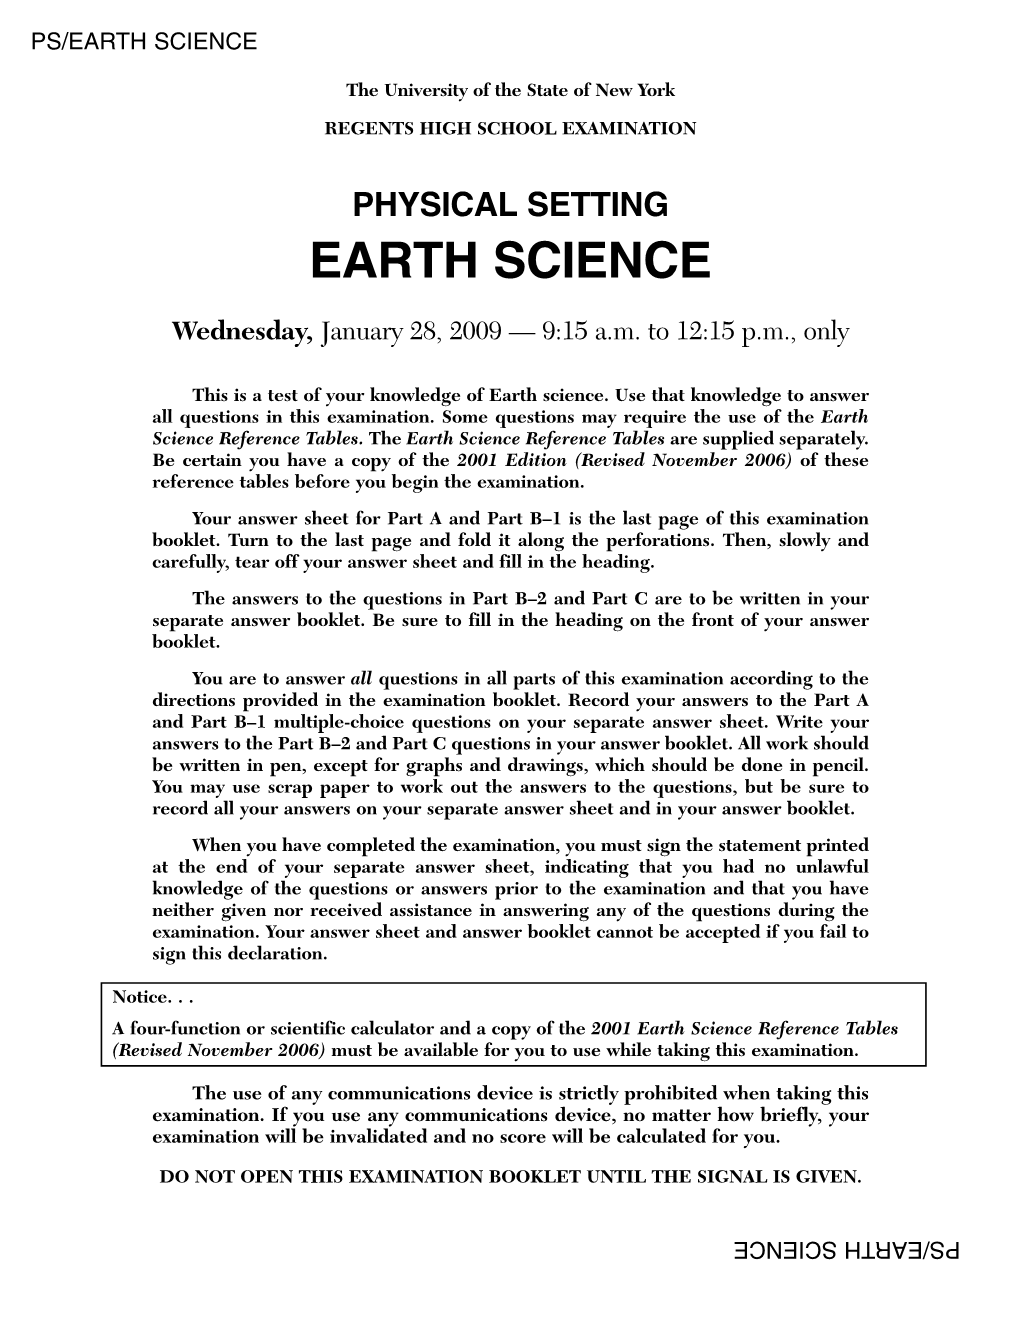 Physical Setting/Earth Science Examination